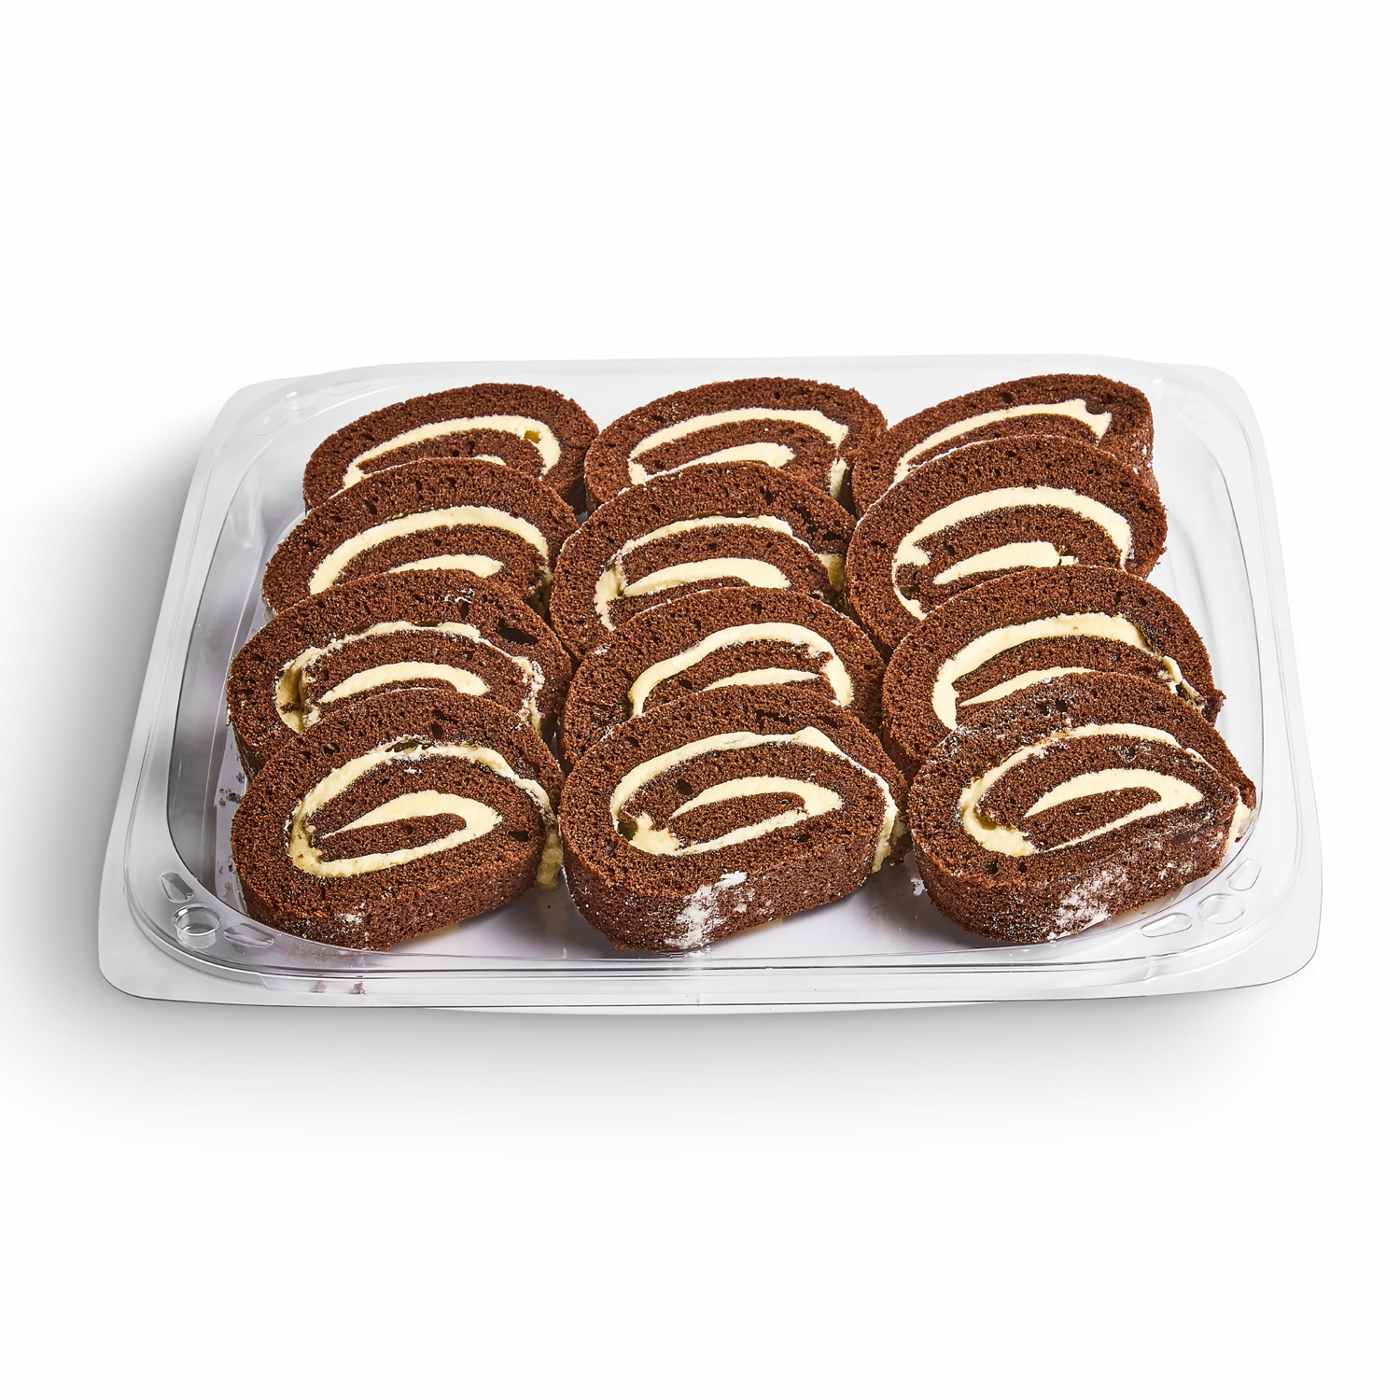 H-E-B Bakery Party Tray - Chocolate Cake Rolls; image 1 of 3